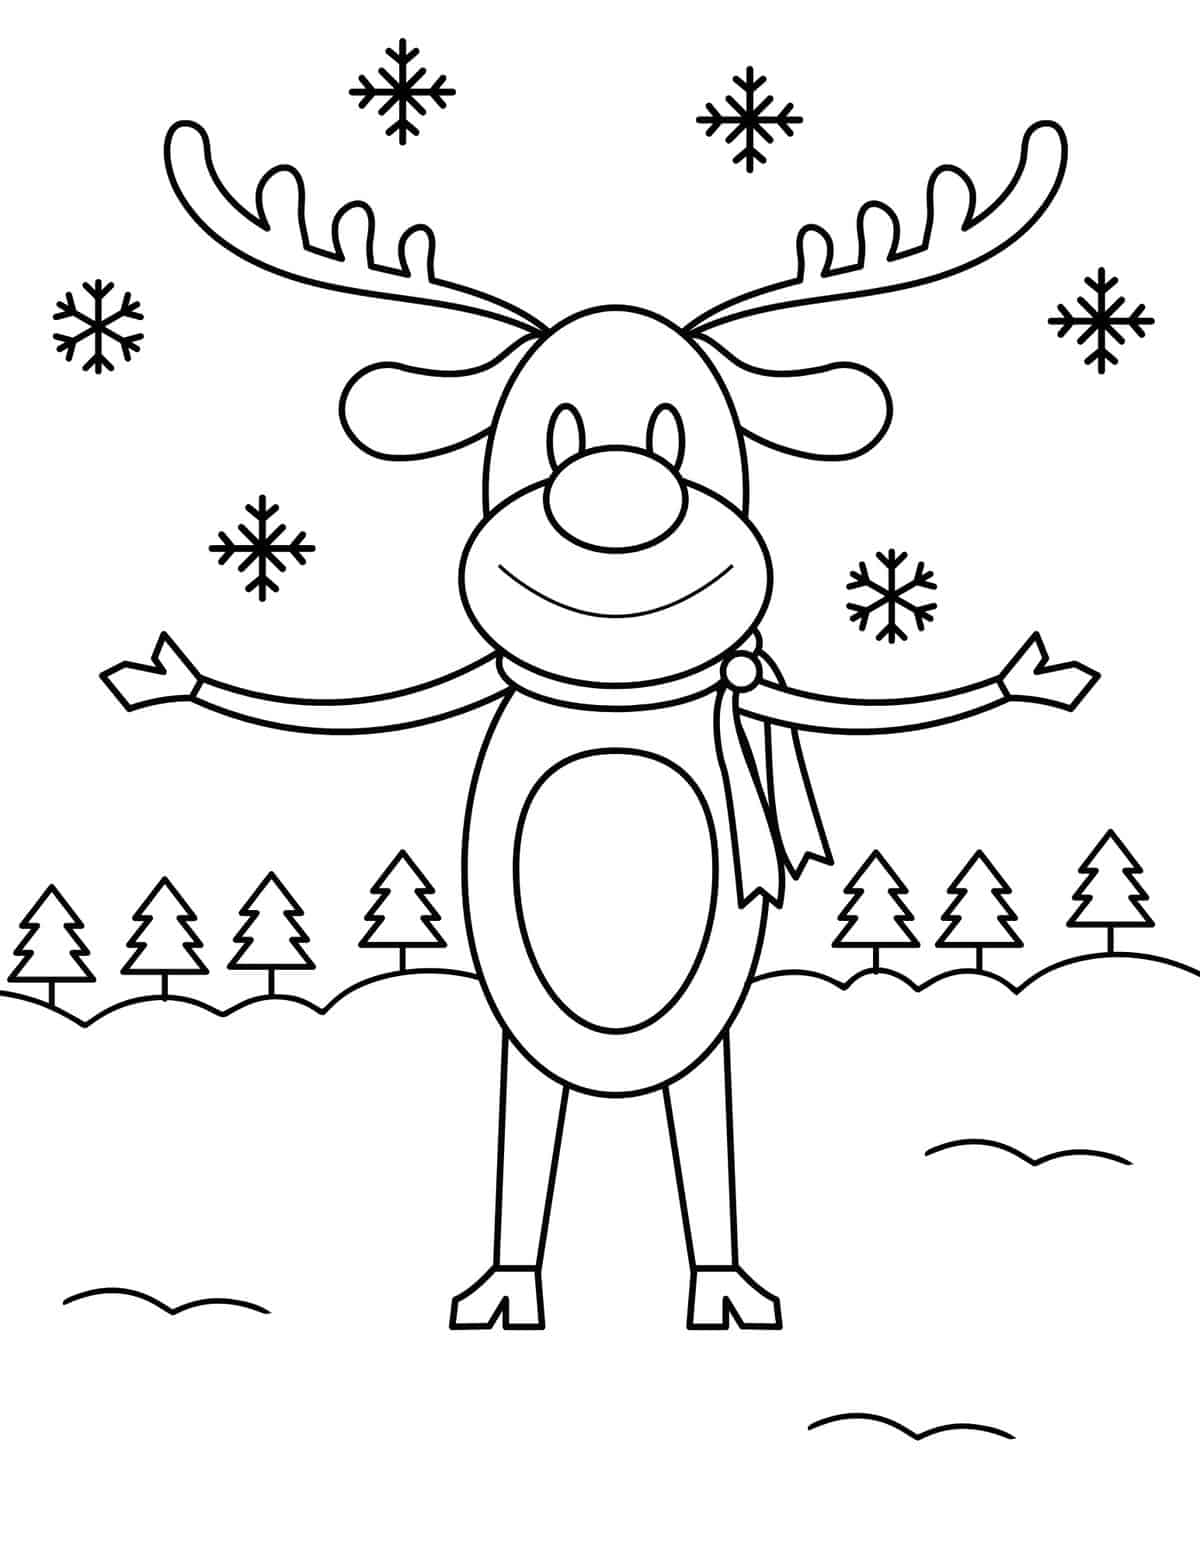 reindeer in the snow with pine trees and snowflakes in the background